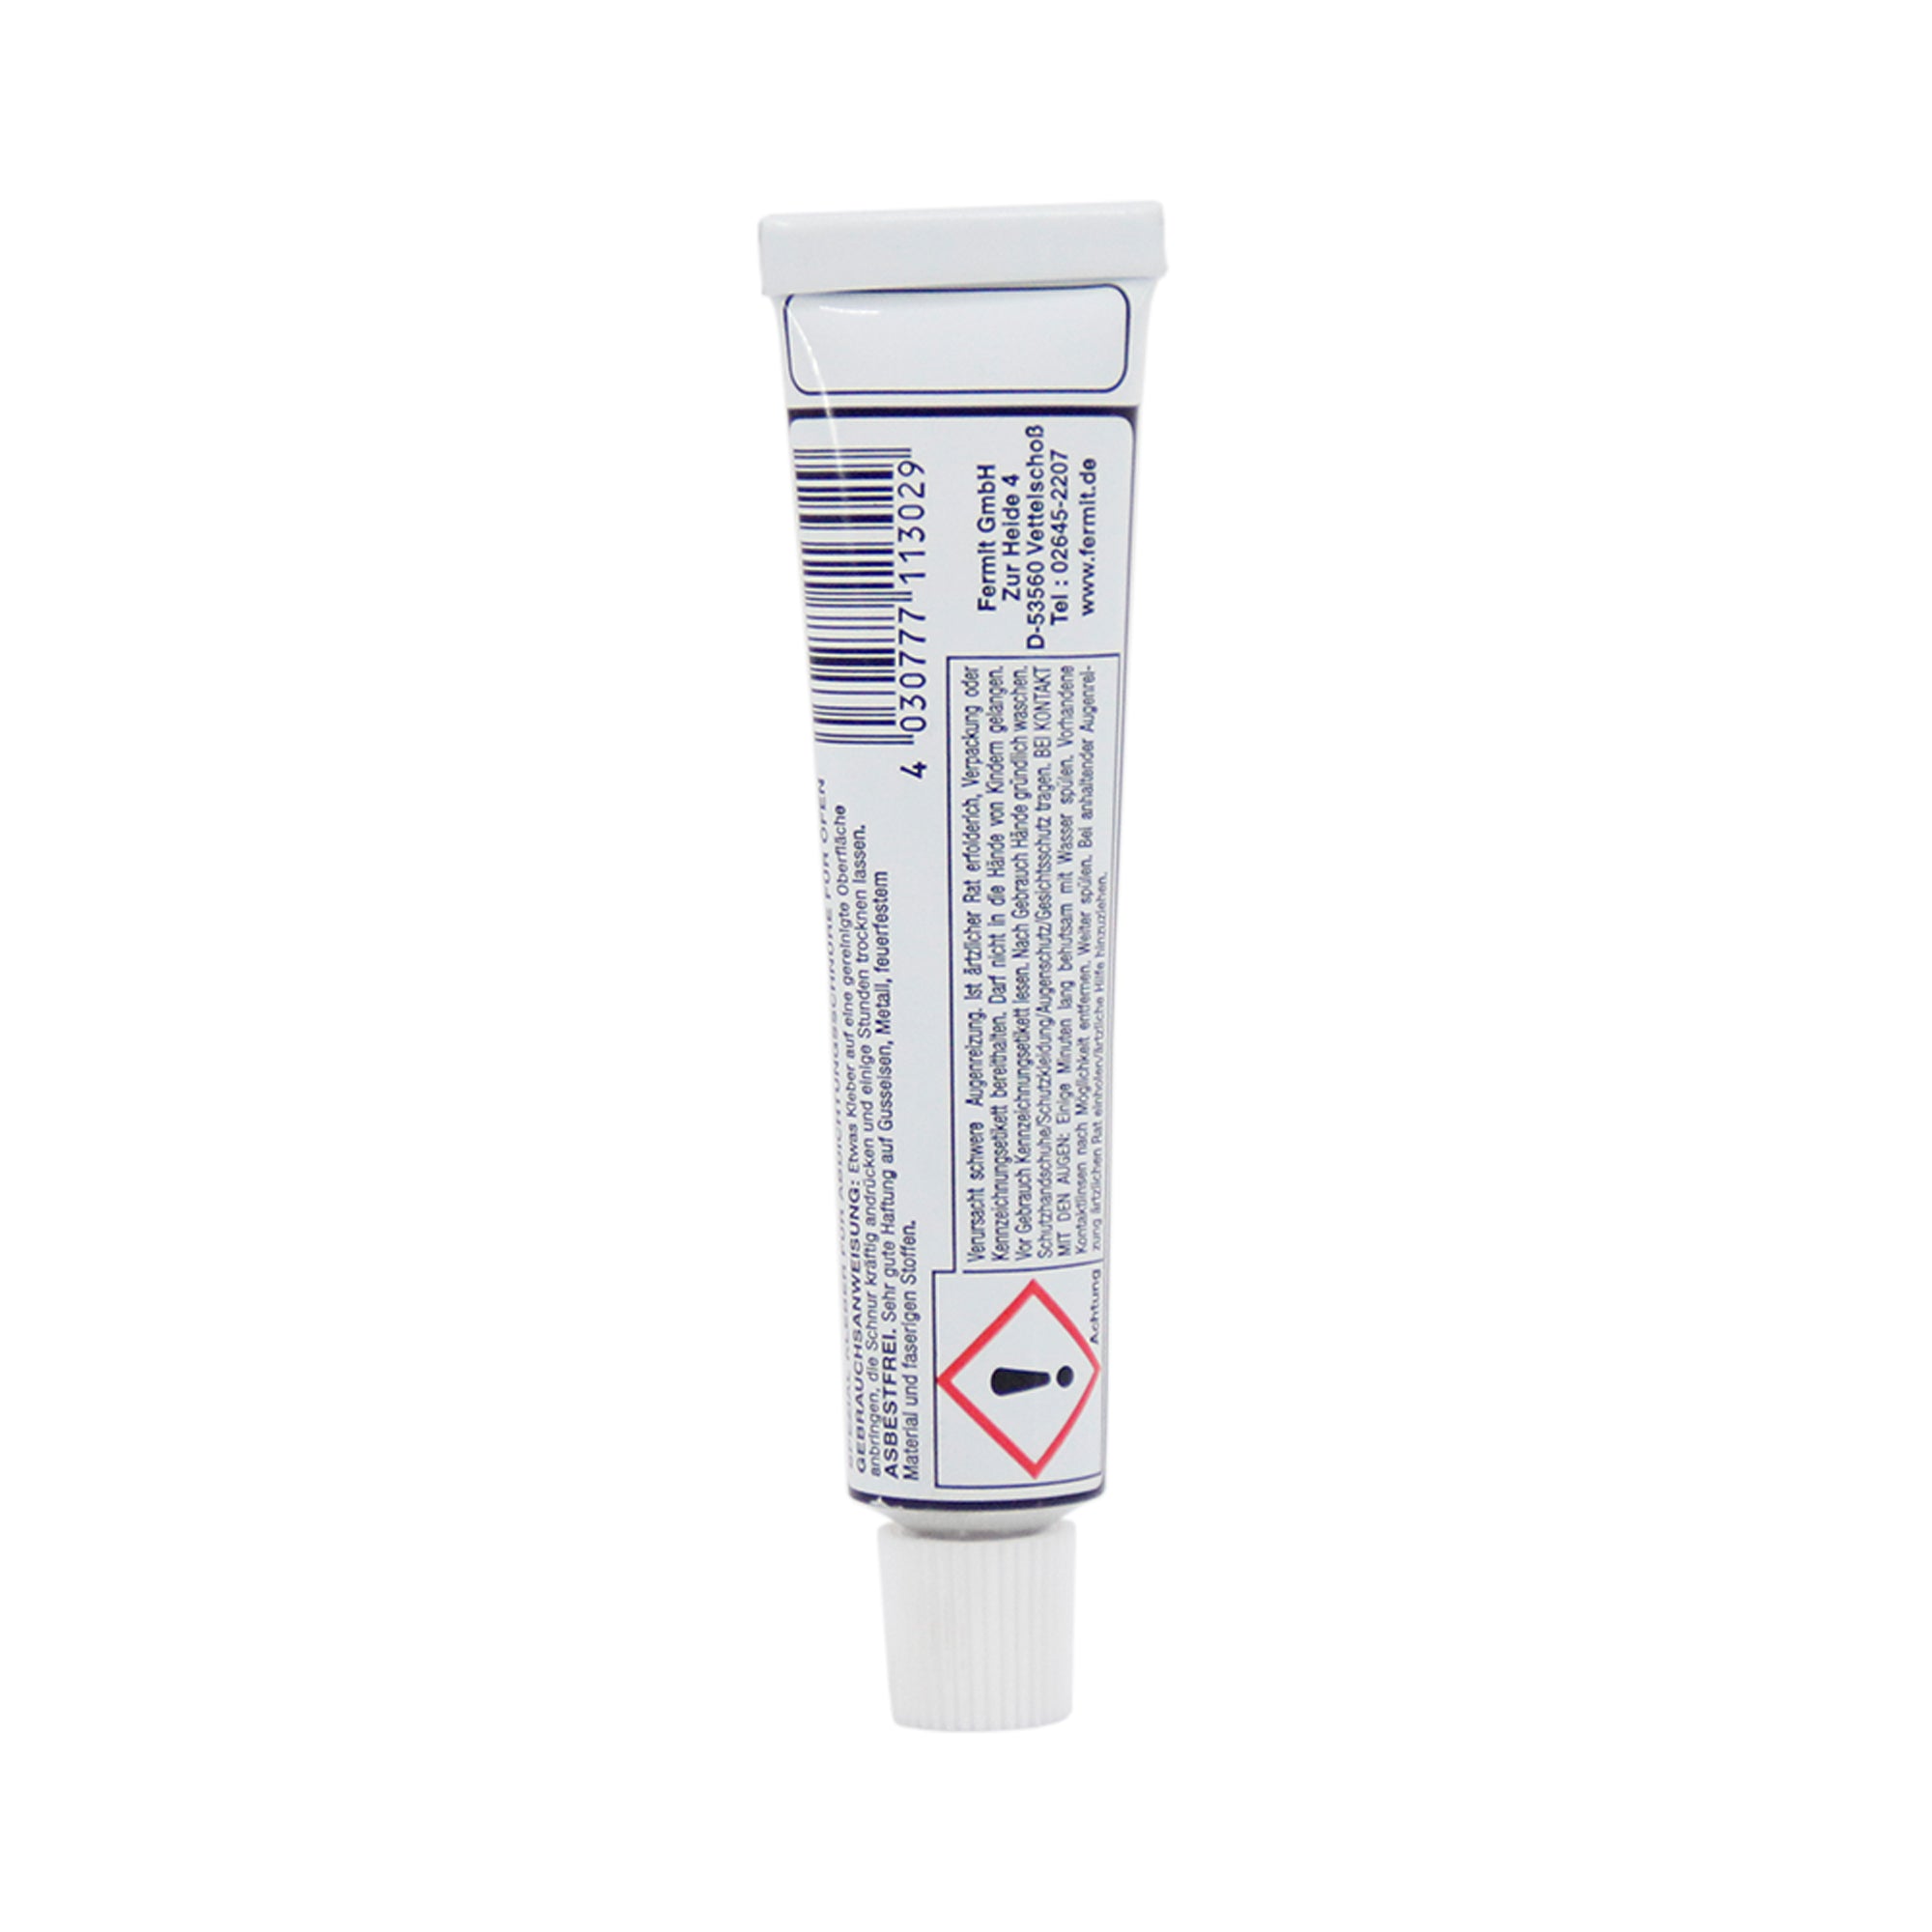 Sealing cord- oven cord adhesive heat resistant up to 1100°C